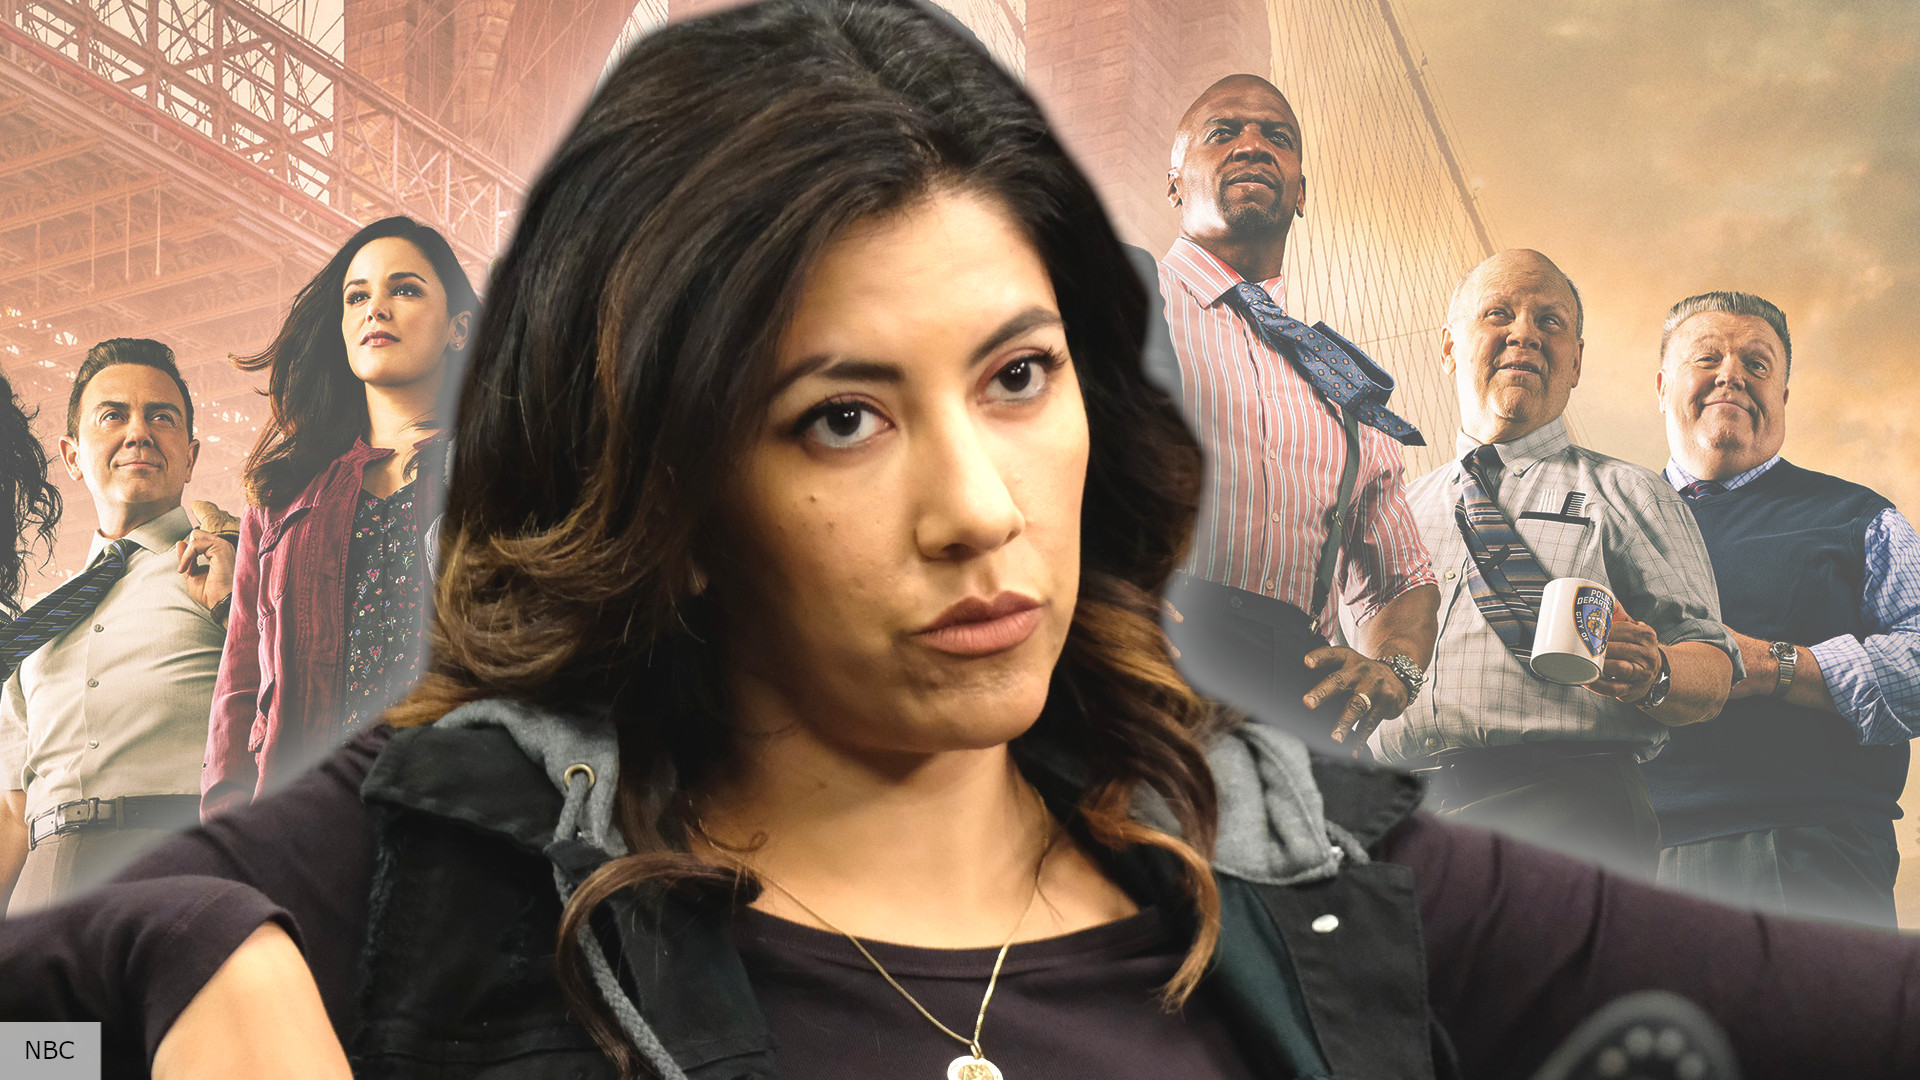 Brooklyn 99 character’s most memorable detail was a total accident